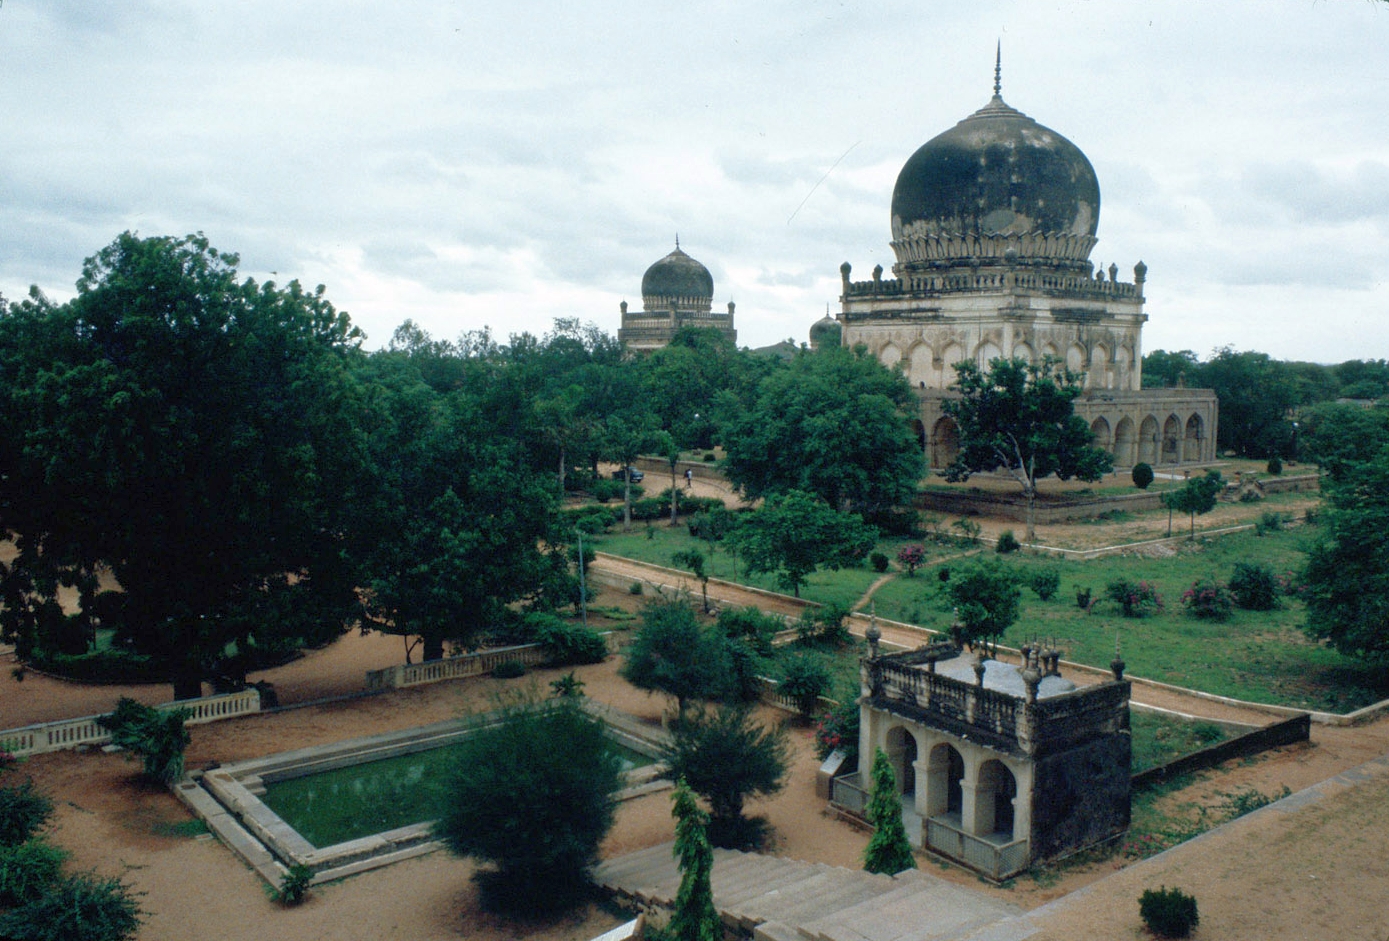 Qutb Shahi Royal Tombs - General view of tombs with surrounding gardens and pool